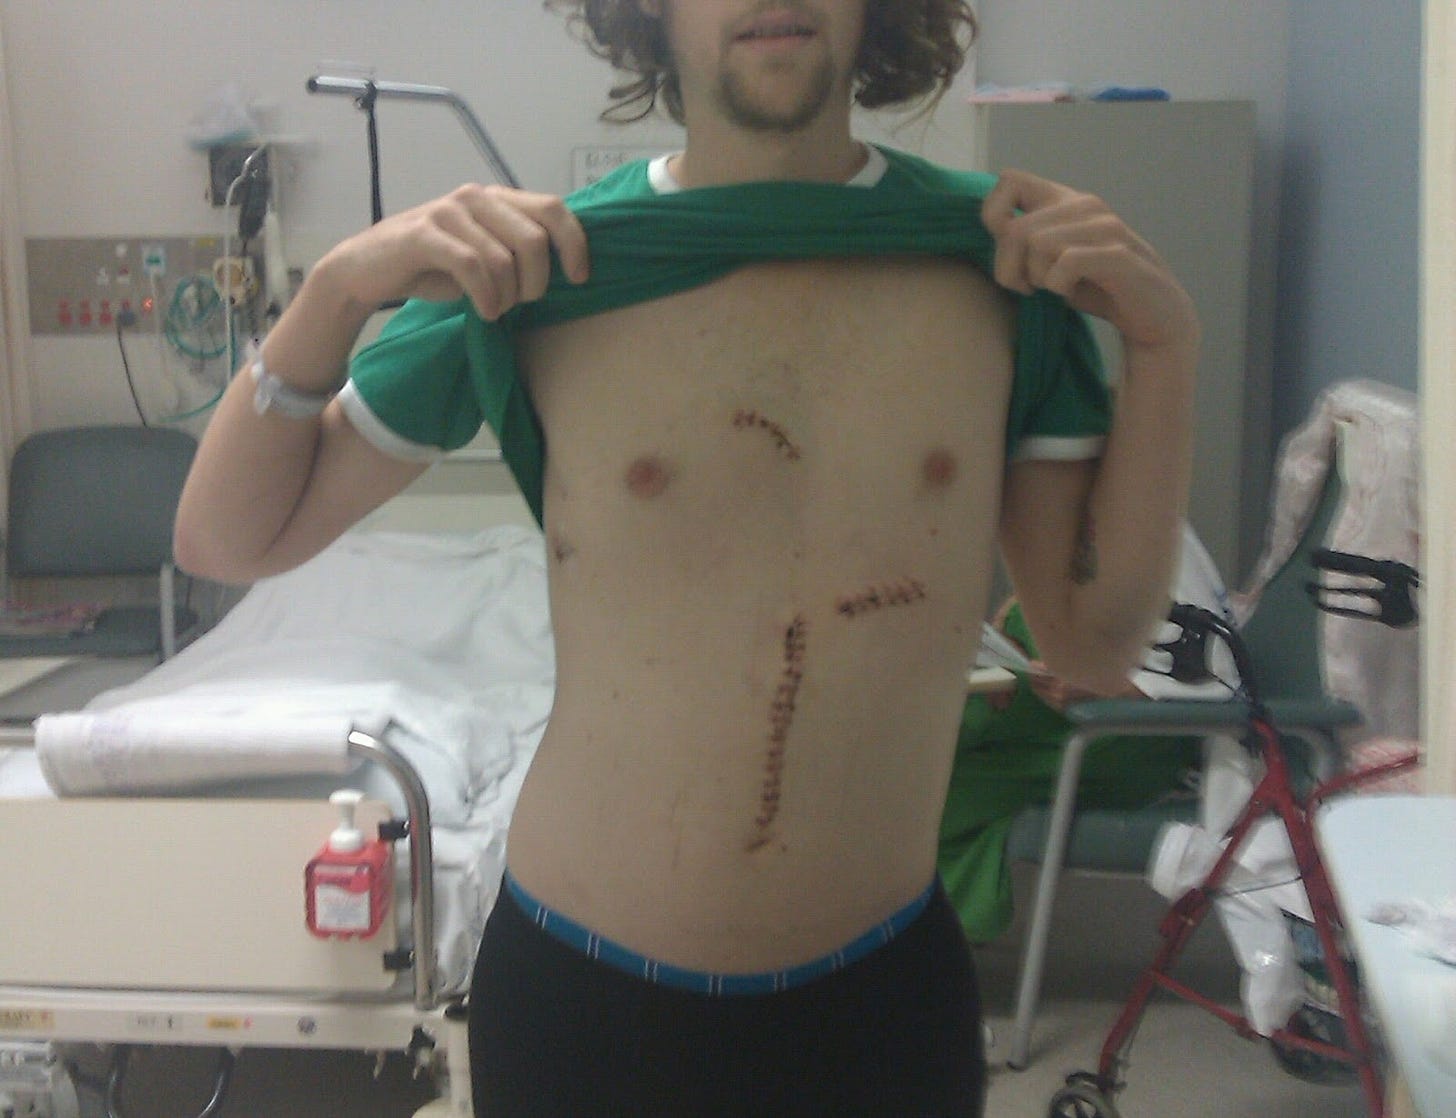 Matt lifting his shirt up after surgery, showing his three scars - they are long and pretty brutal.